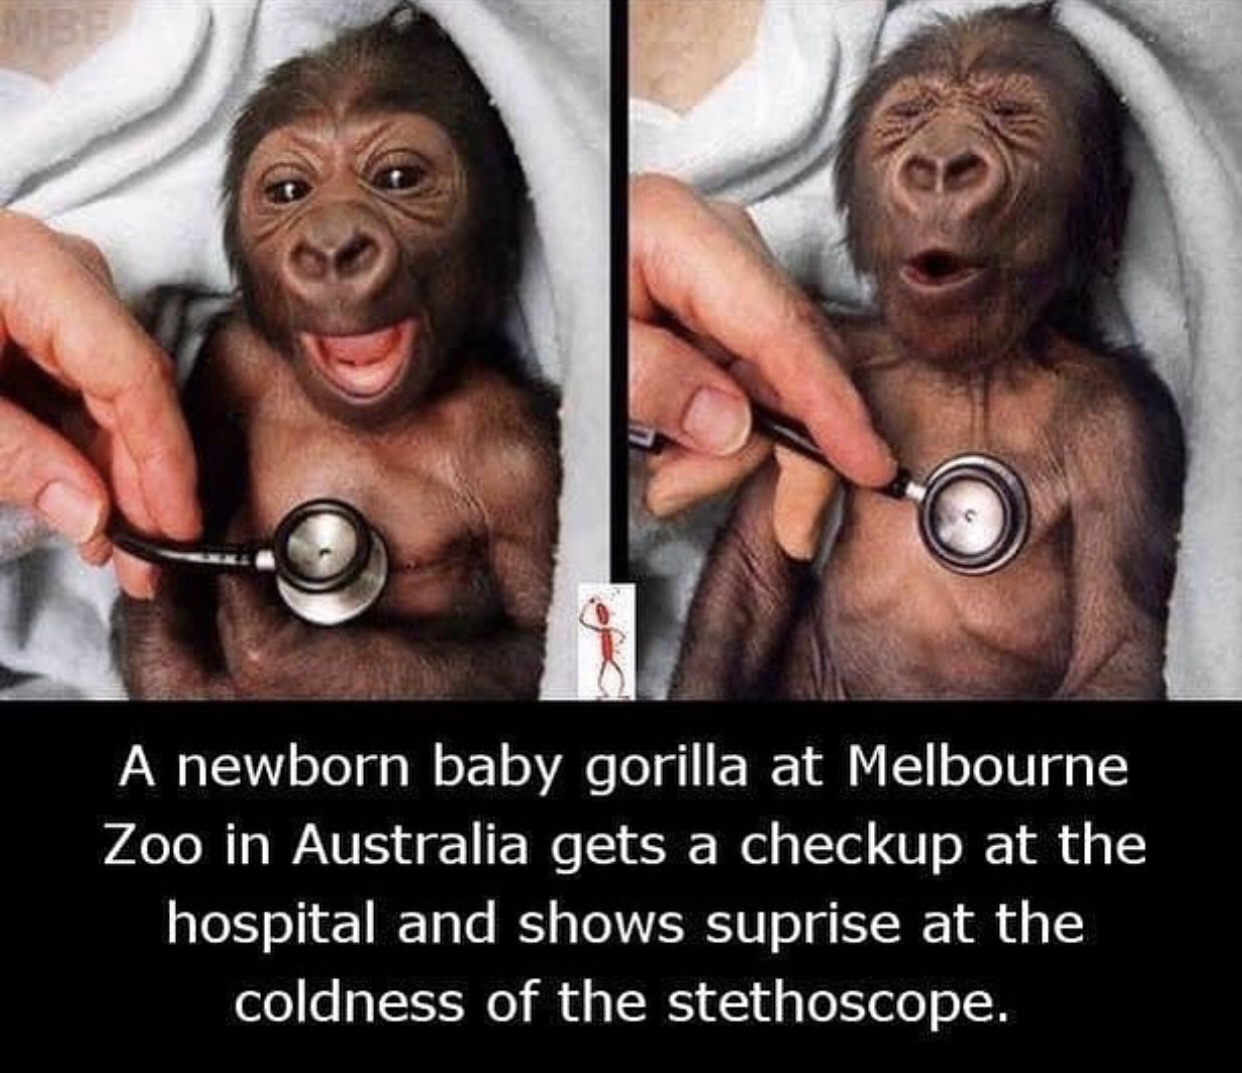 baby gorilla cold stethoscope - A newborn baby gorilla at Melbourne Zoo in Australia gets a checkup at the hospital and shows suprise at the coldness of the stethoscope.